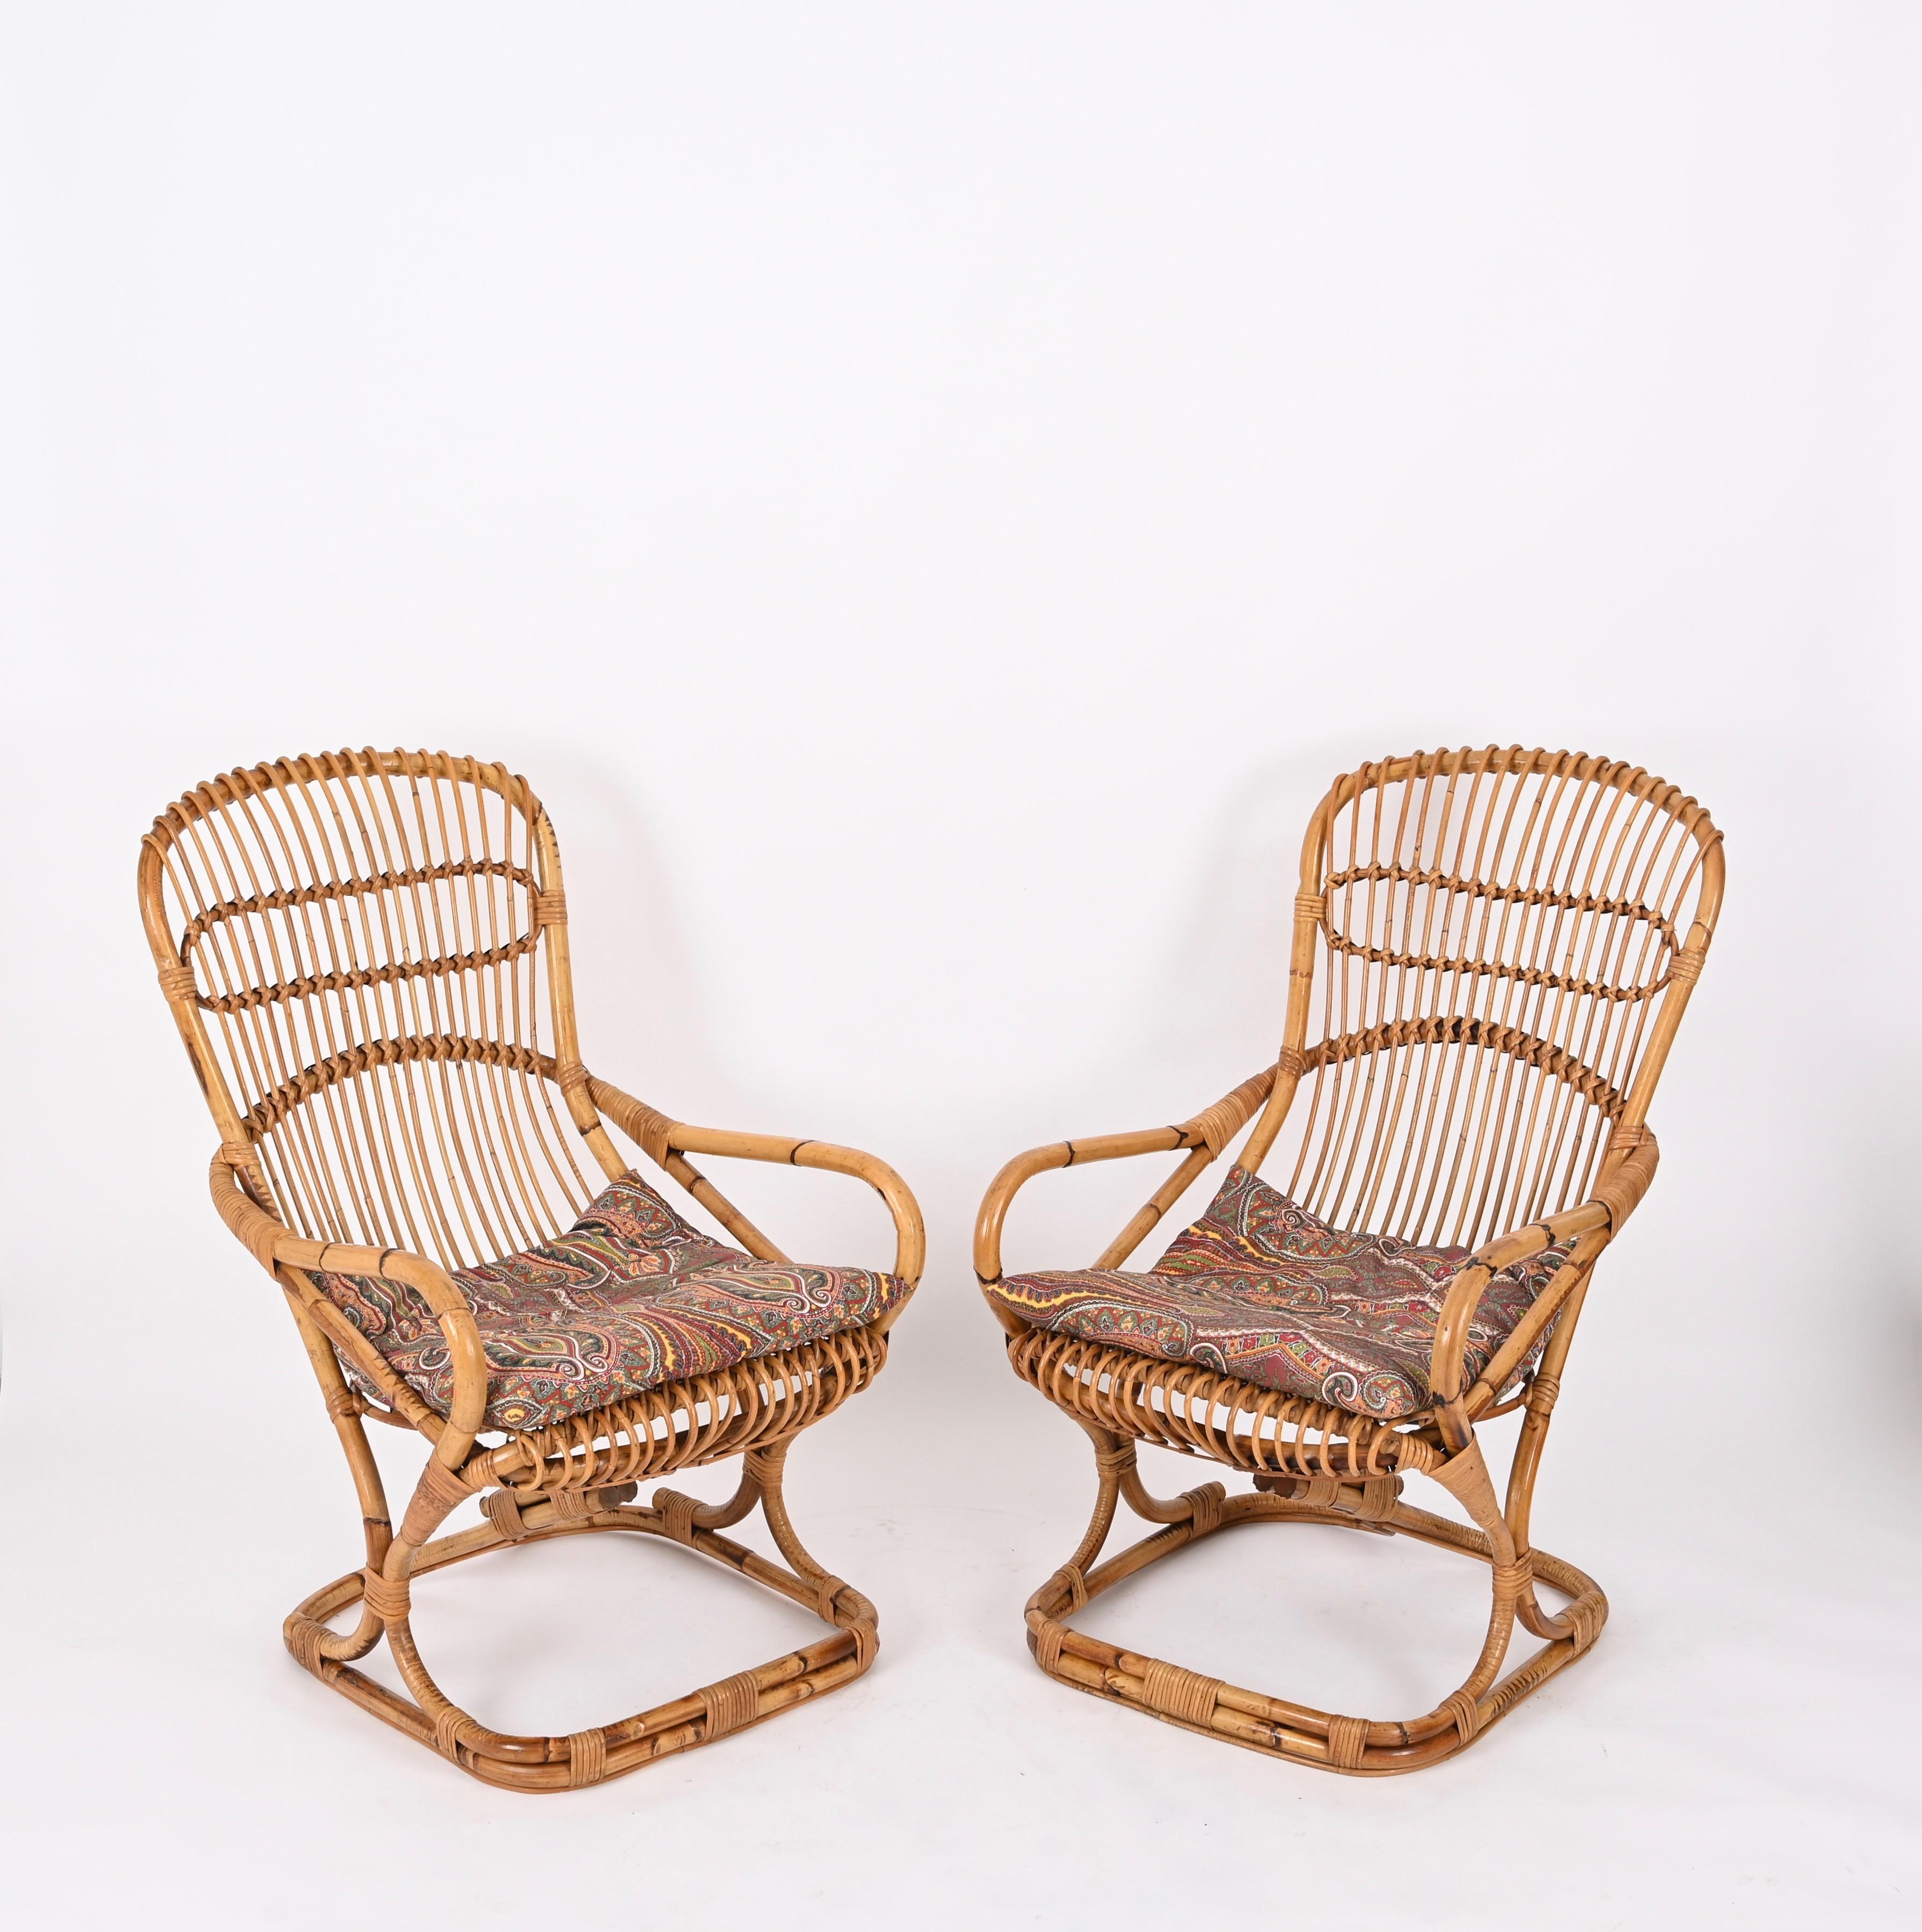 Pair of Midcentury Italian Wicker and Rattan Armchairs by Tito Agnoli, 1960s For Sale 4